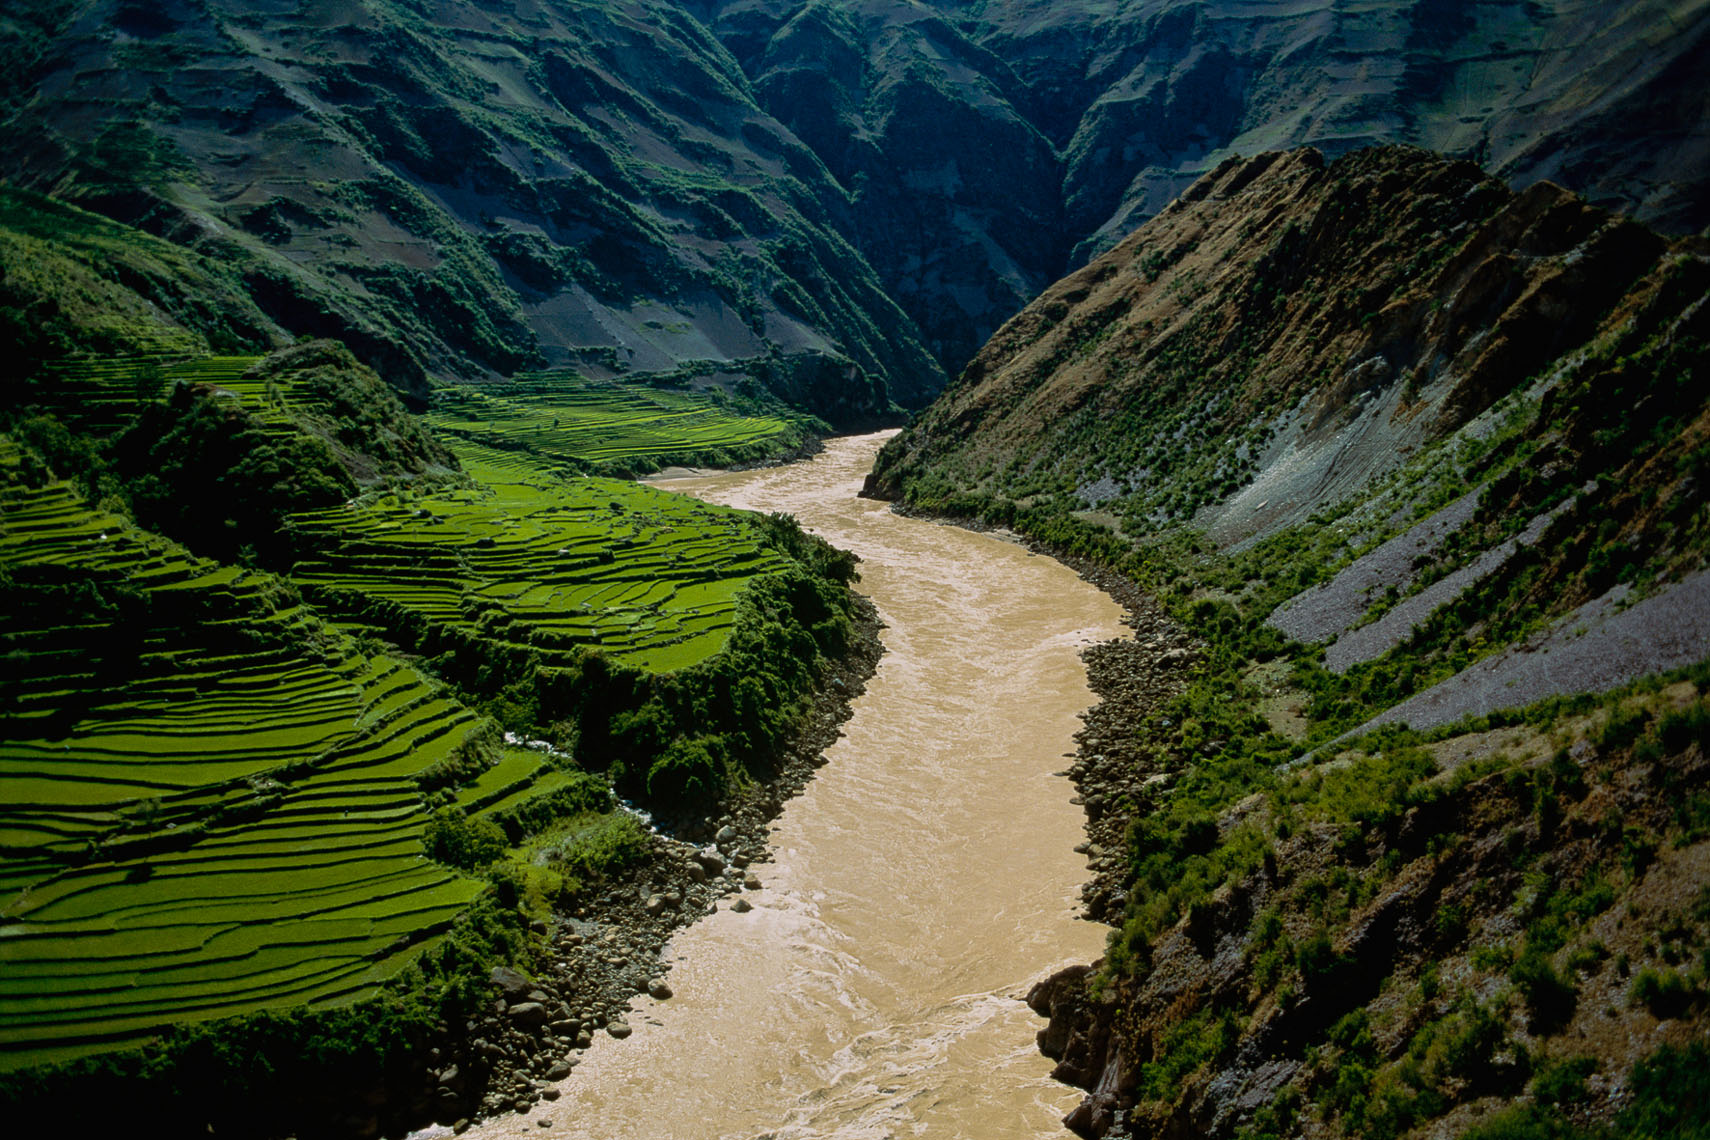 The inhospitable gorges carved by the Mekong near Lanping, in northern Yunna, keep the river unused and unnavigable until its final 90-mile stretch through China, as it spills into Laos.